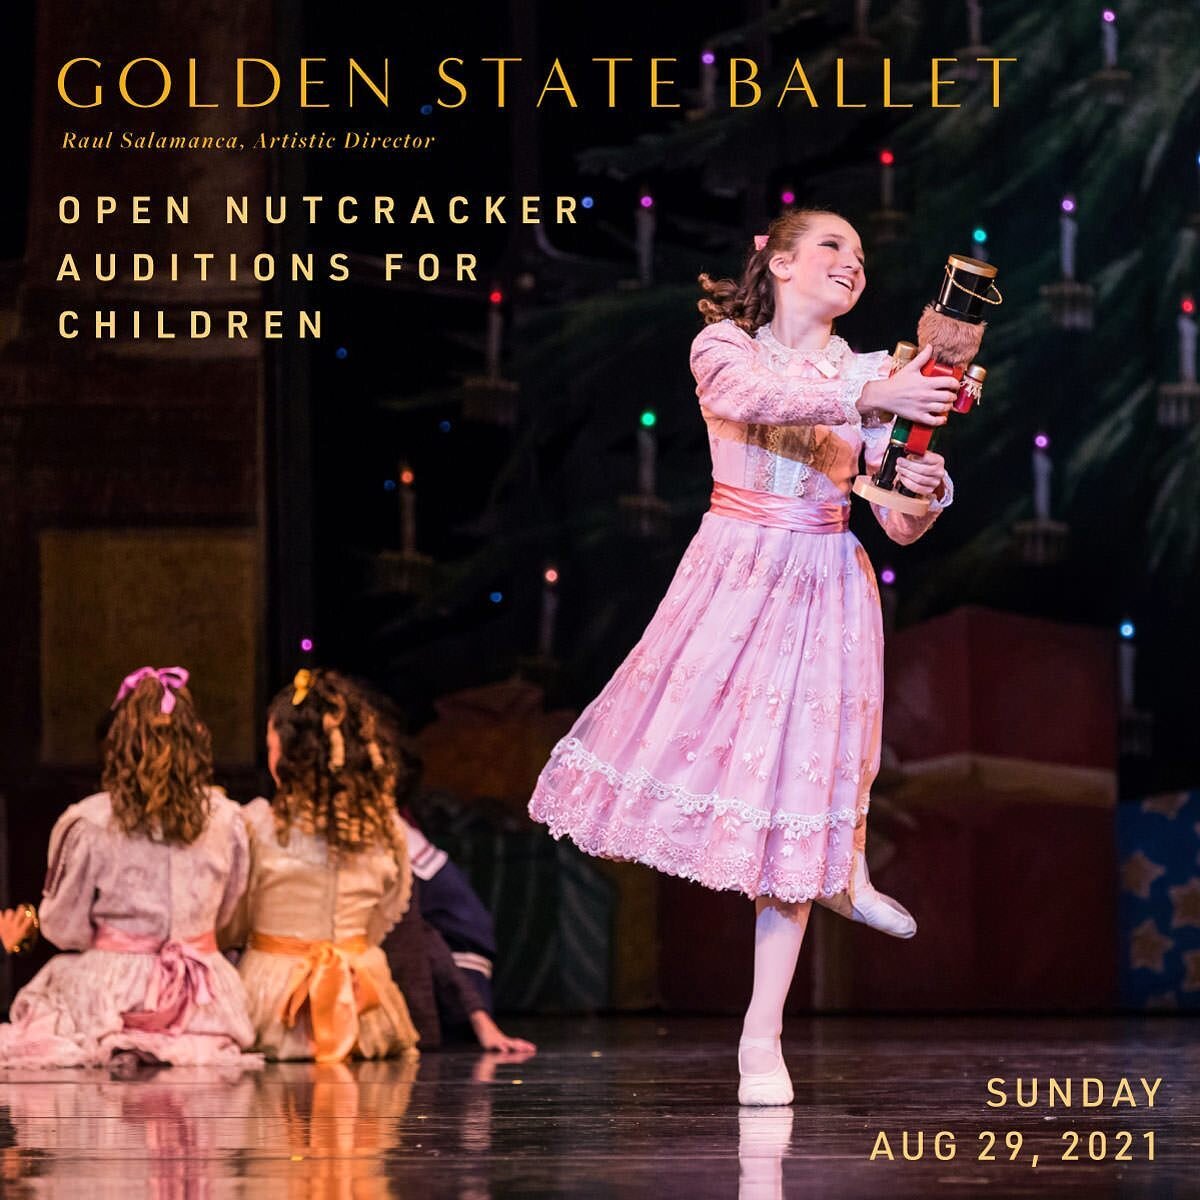 Calling all student dancers in San Diego! 

Join us Sunday, August 29th to audition for a role in Golden State Ballet&rsquo;s The Nutcracker. Be a part of San Diego&rsquo;s biggest professional Nutcracker production at the Civic Theatre for 10 shows 